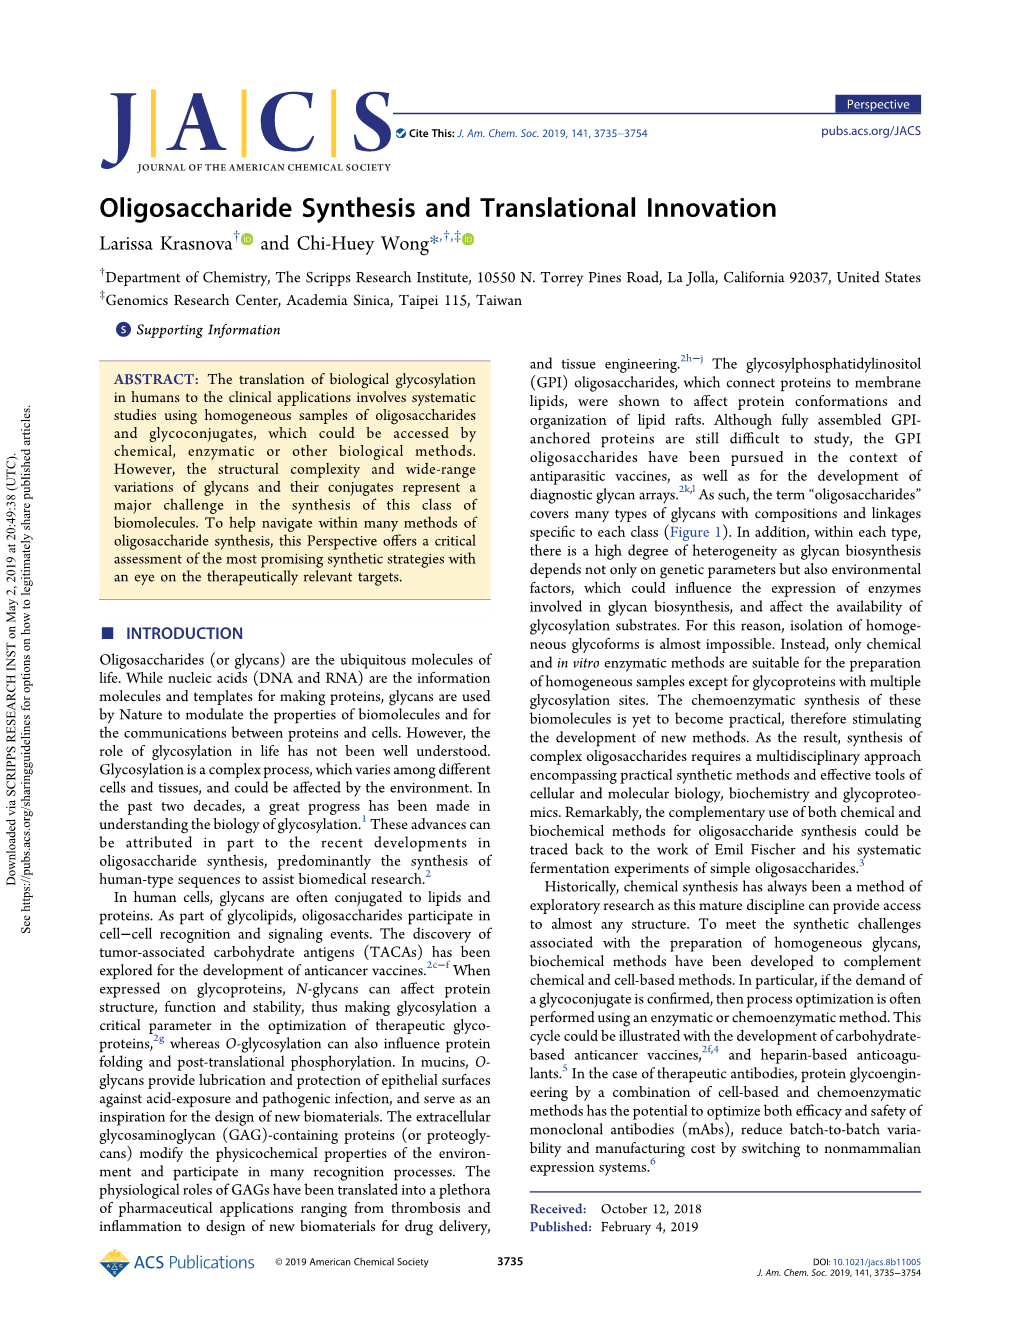 Oligosaccharide Synthesis and Translational Innovation † † ‡ Larissa Krasnova and Chi-Huey Wong*, , † Department of Chemistry, the Scripps Research Institute, 10550 N